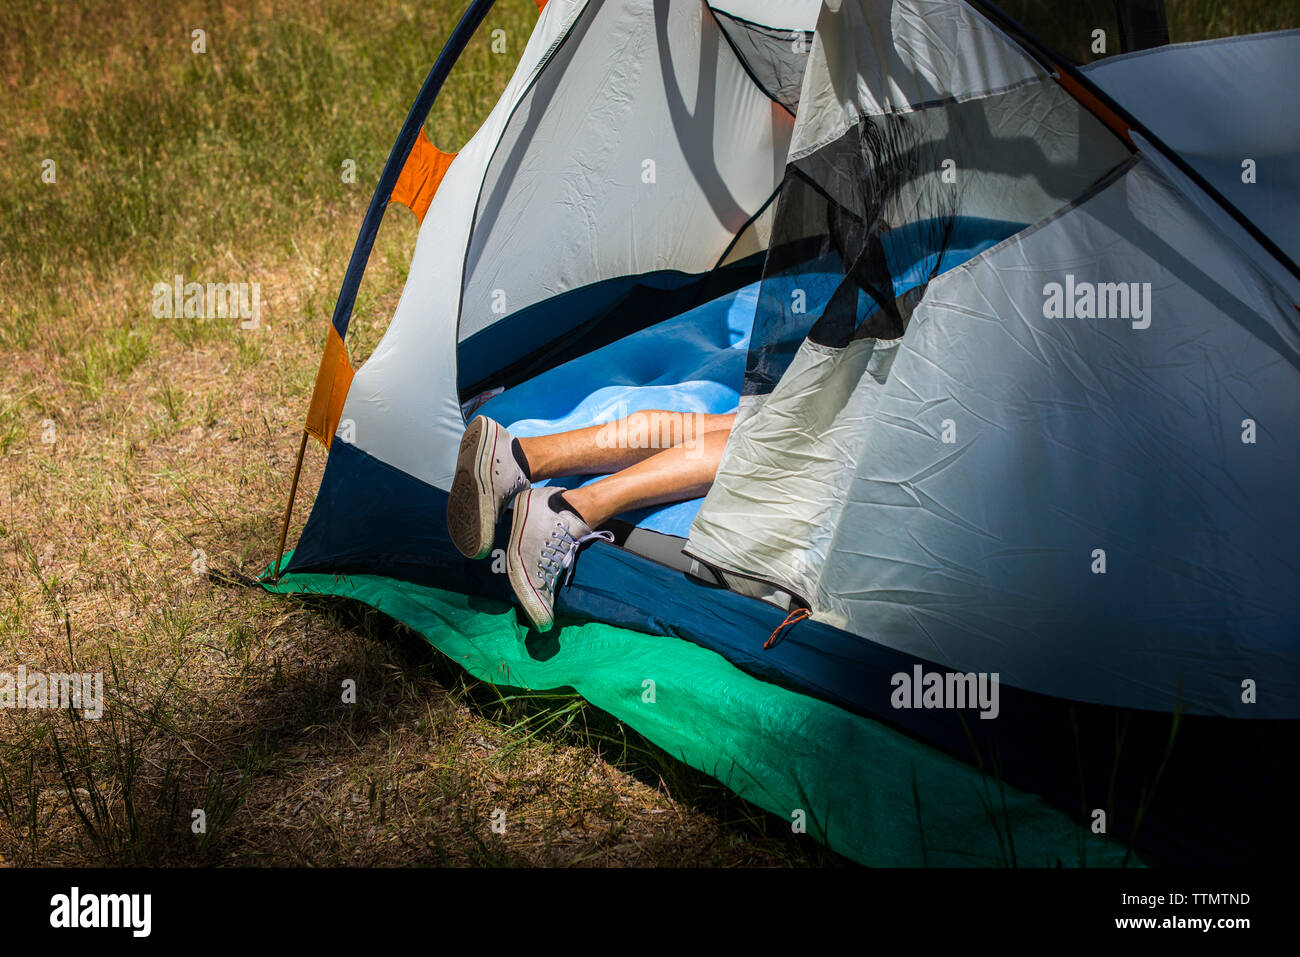 Legs of man in tent Stock Photo